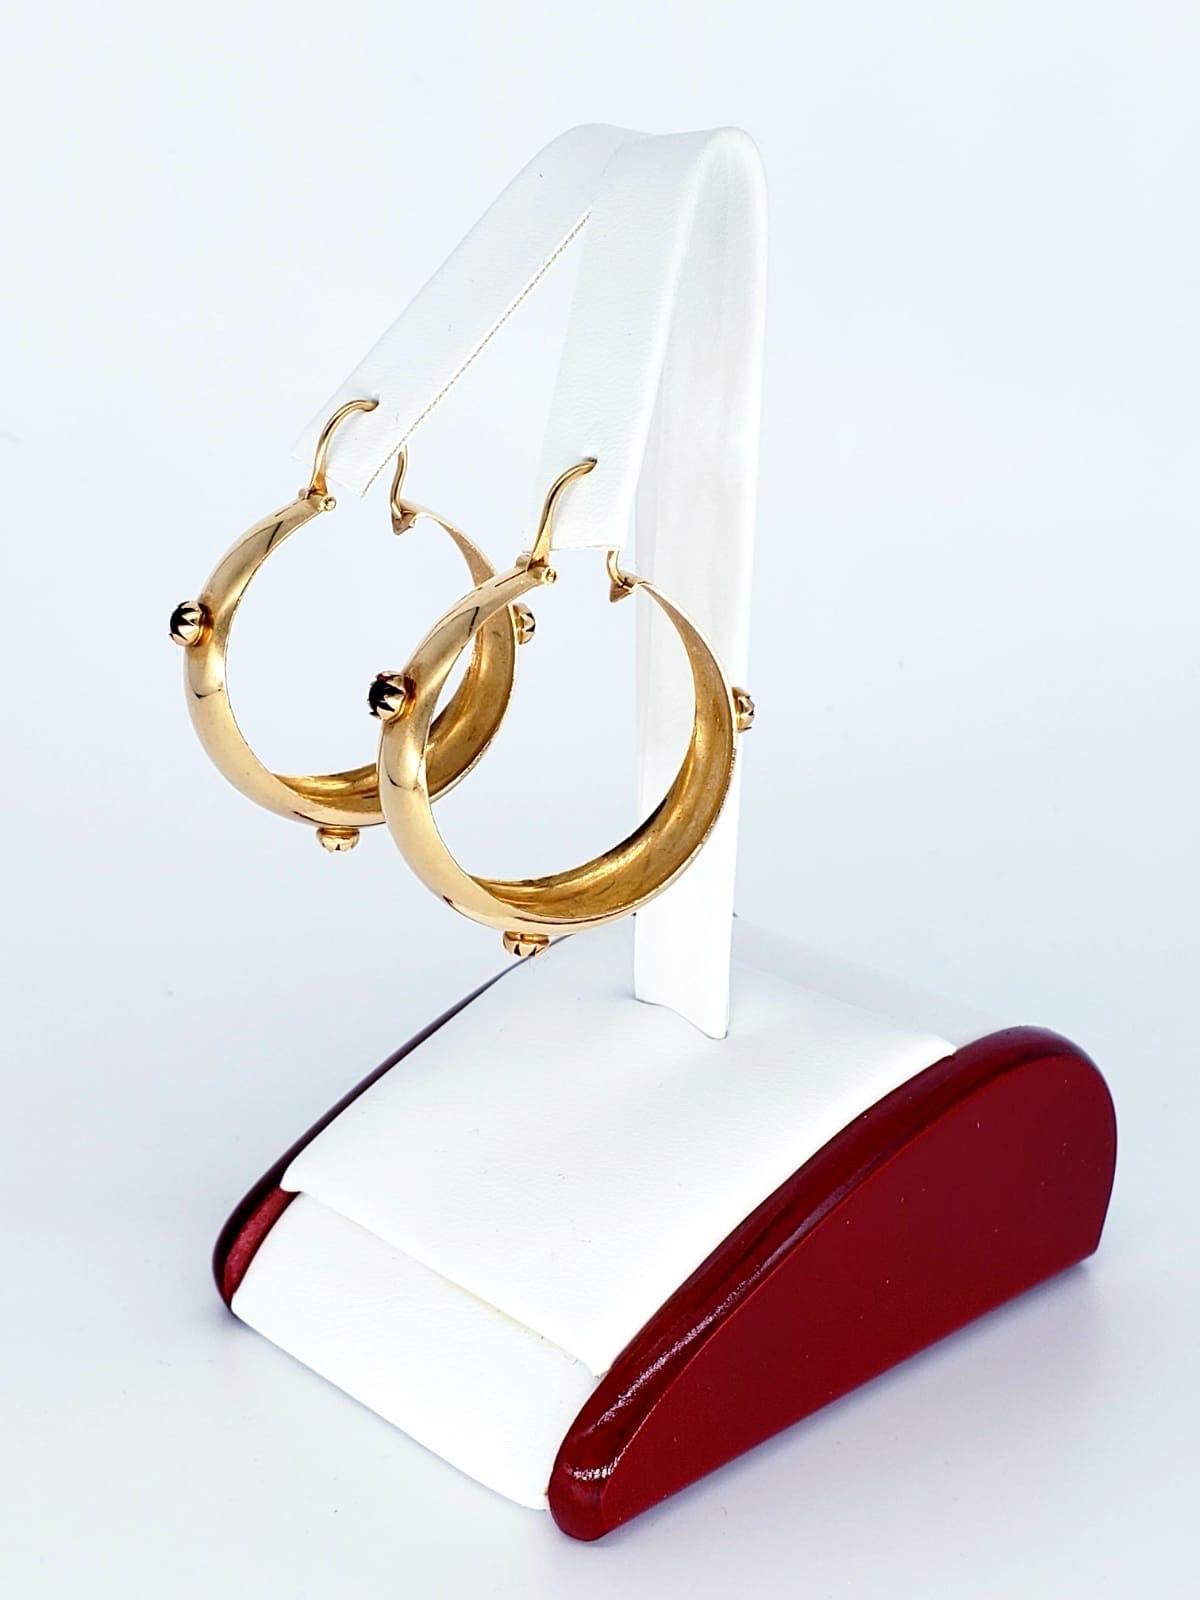 Antique Ruby Cabochon Hoop Earrings 18k Gold. These are a very unique and rare pair of Ruby Cabochon earrings. The earrings measure 1” height & 10.8mm wide. Each Ruby measures 4mm and stamped 18k 750 for gold purity. The earrings weight 9.4 grams.